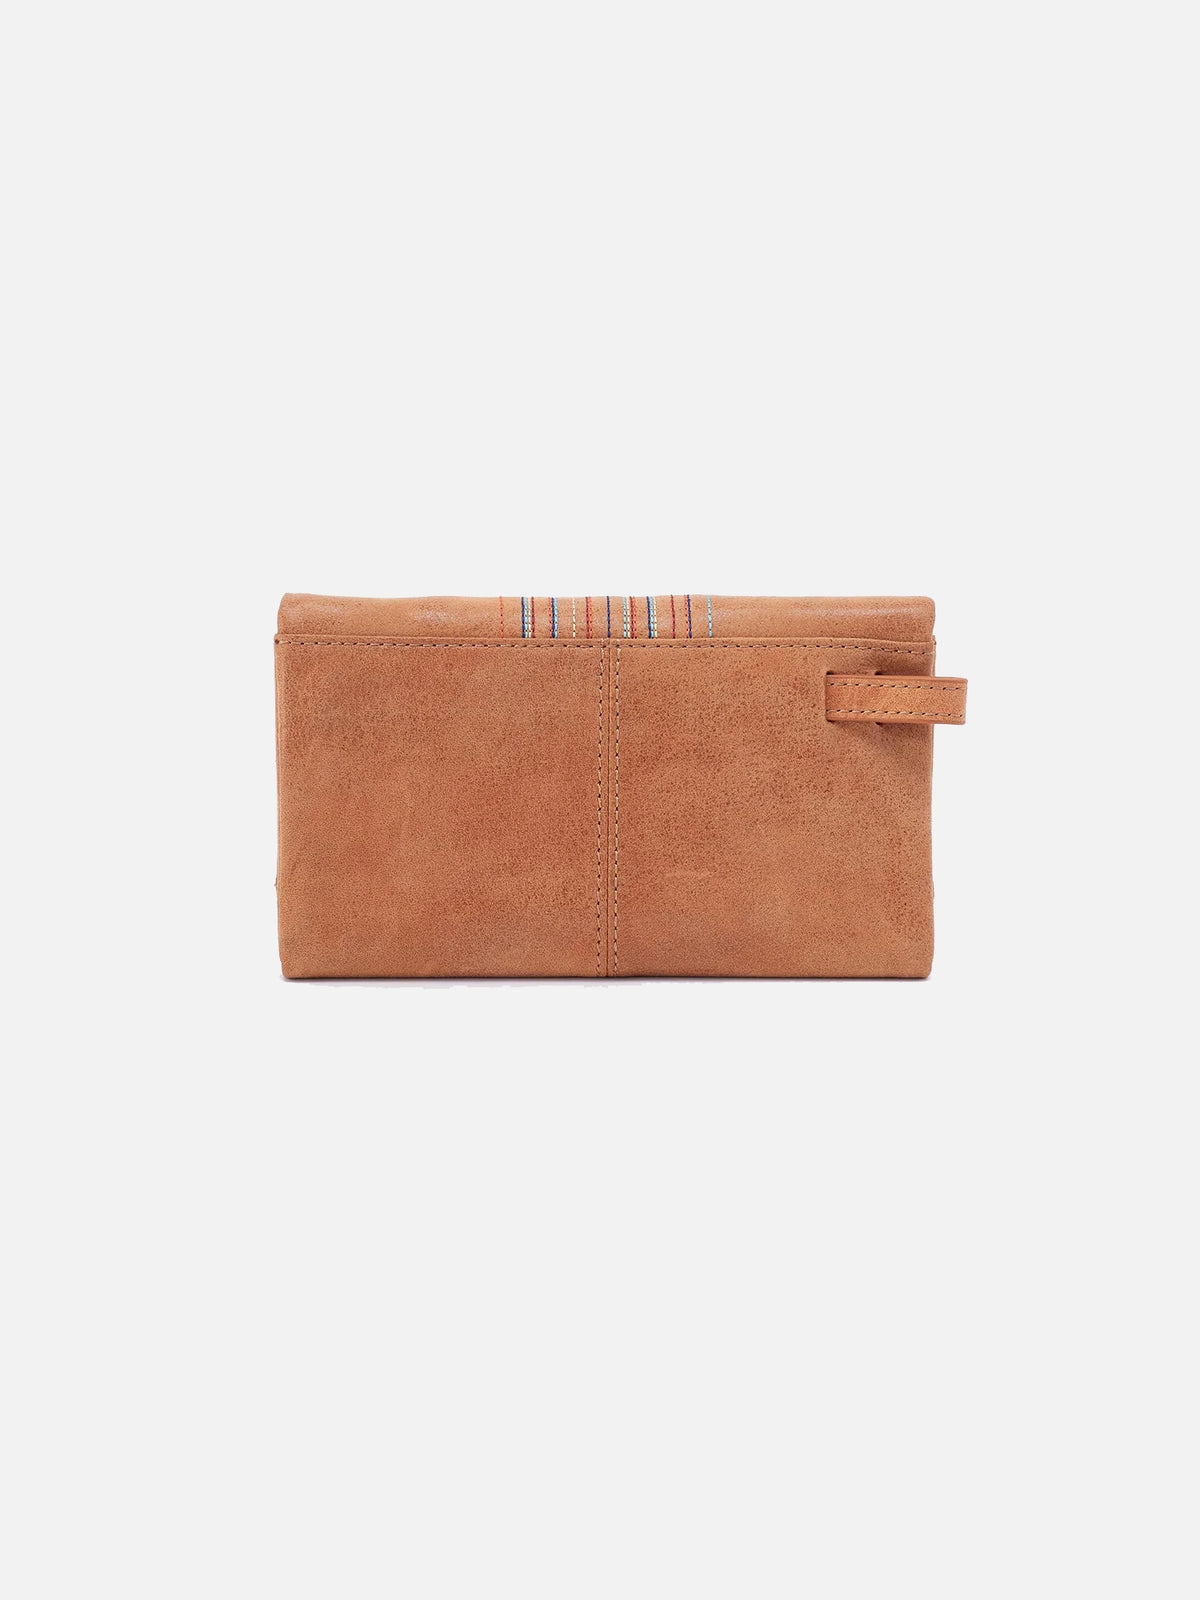 hobo keen continental wallet in whiskey buffed leather